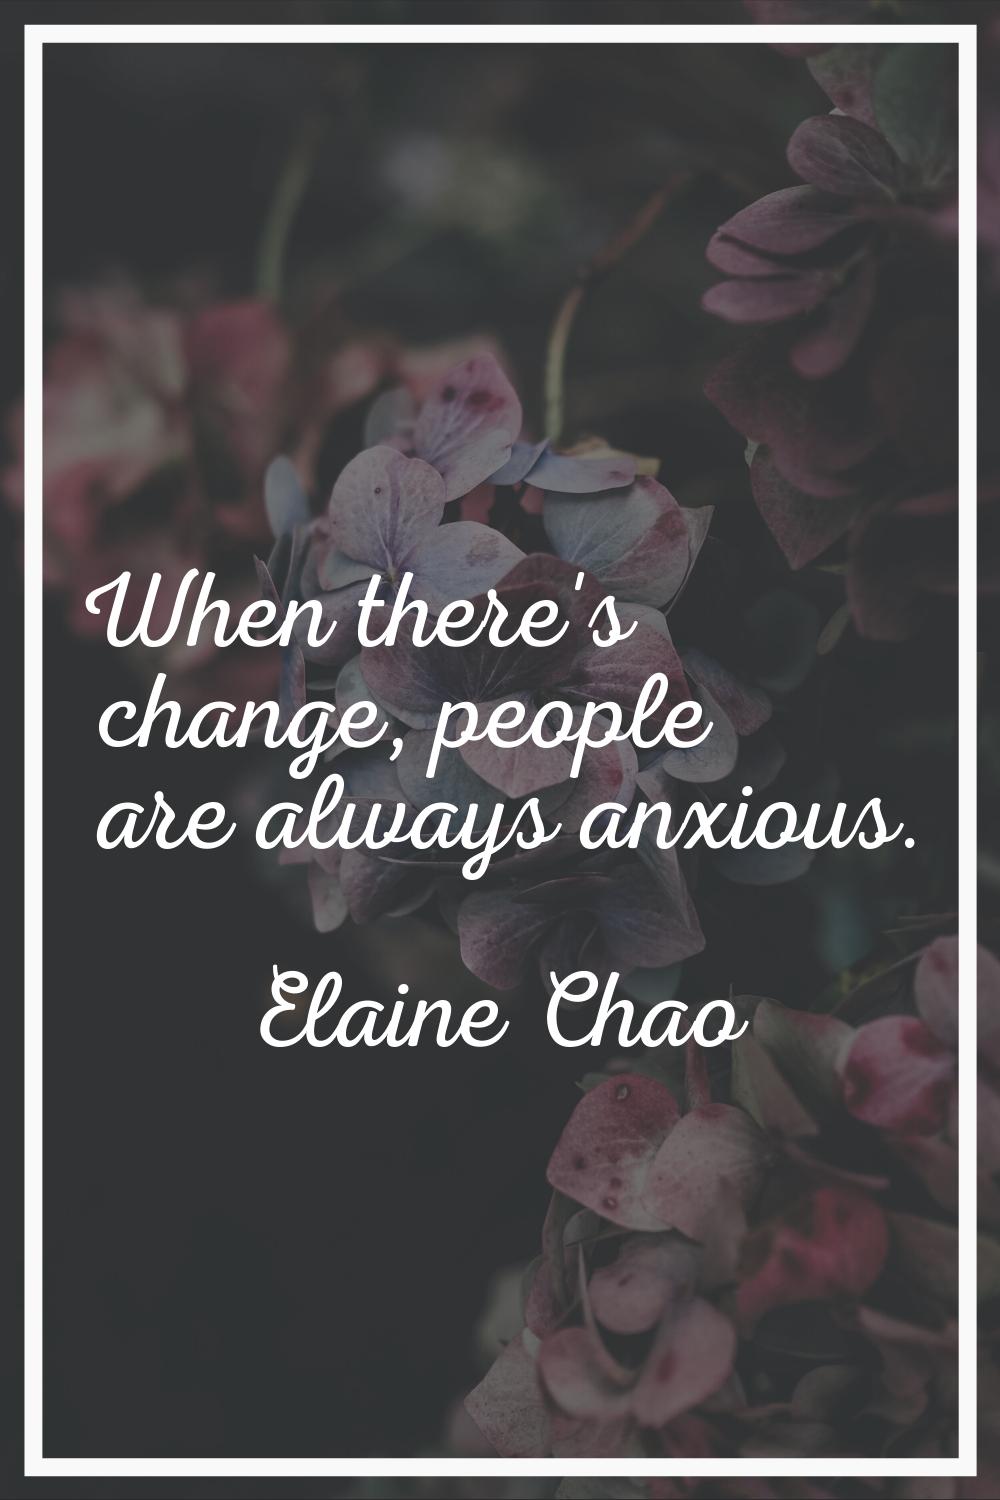 When there's change, people are always anxious.